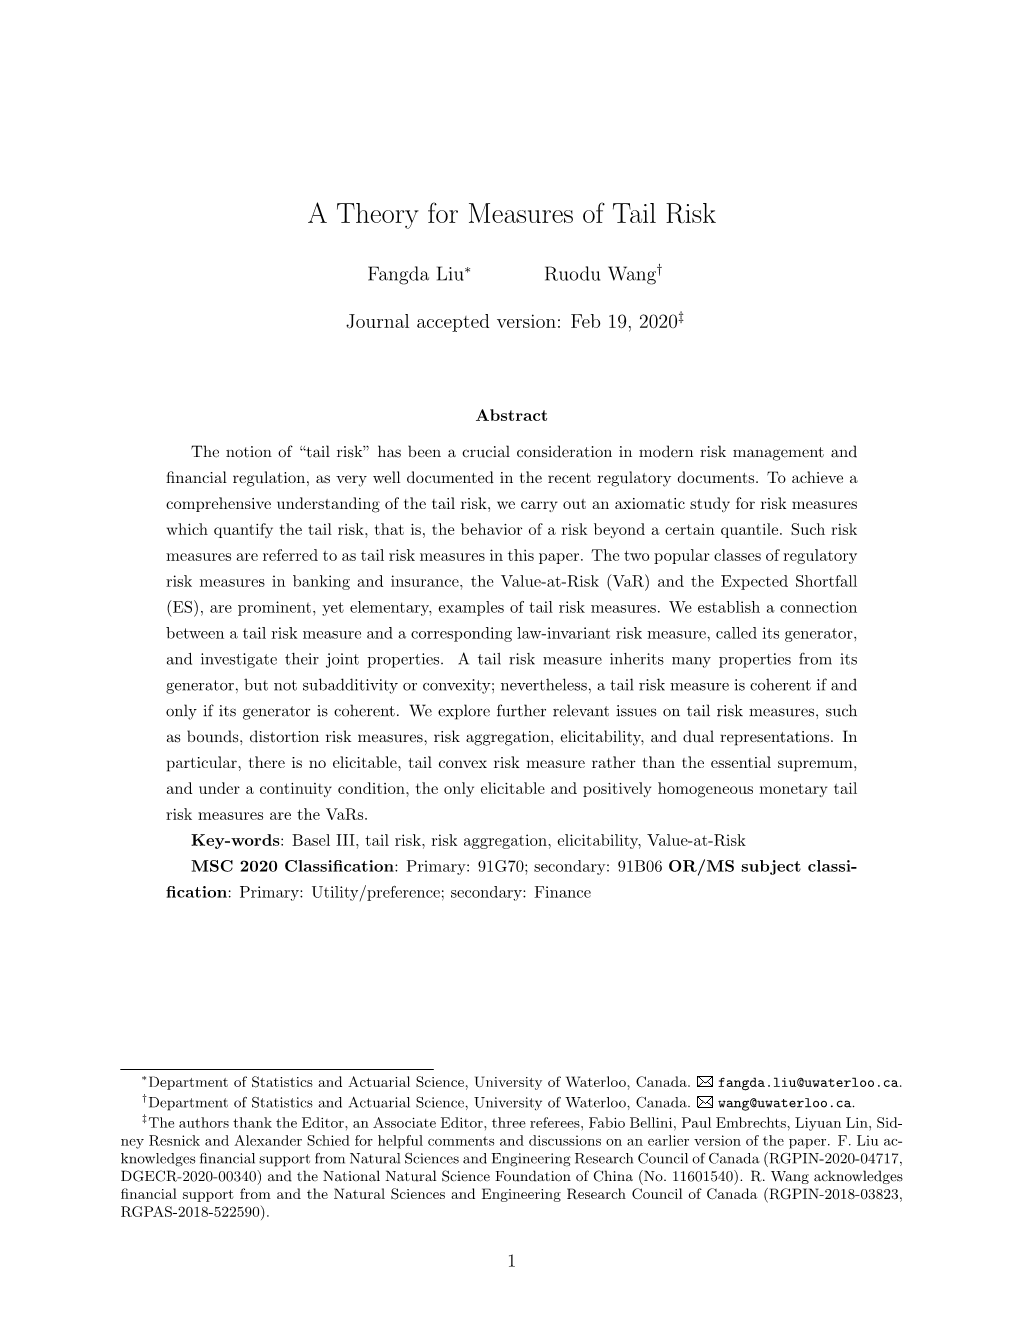 A Theory for Measures of Tail Risk